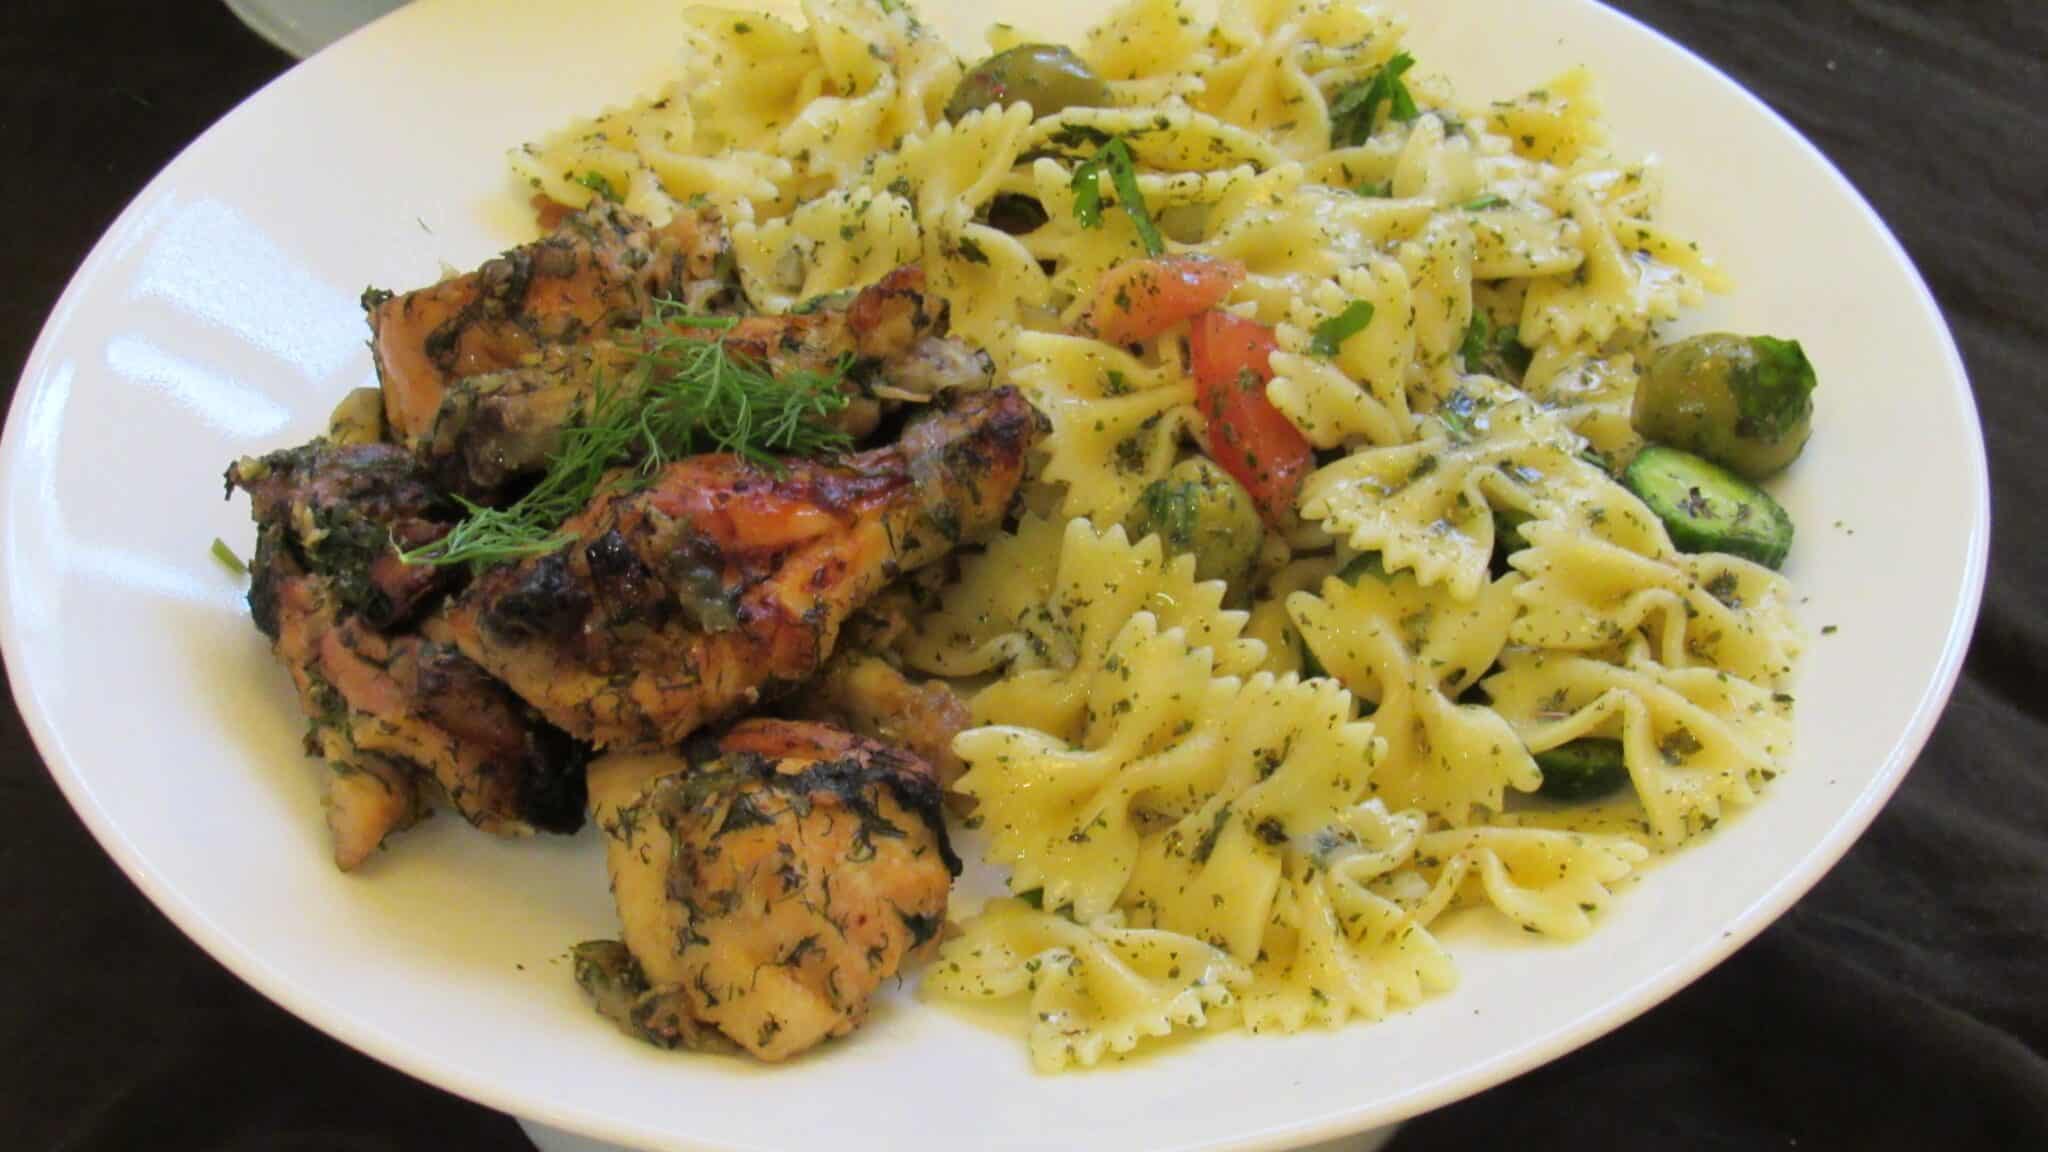 Pasta salad is served with a chicken dish on a white plate.